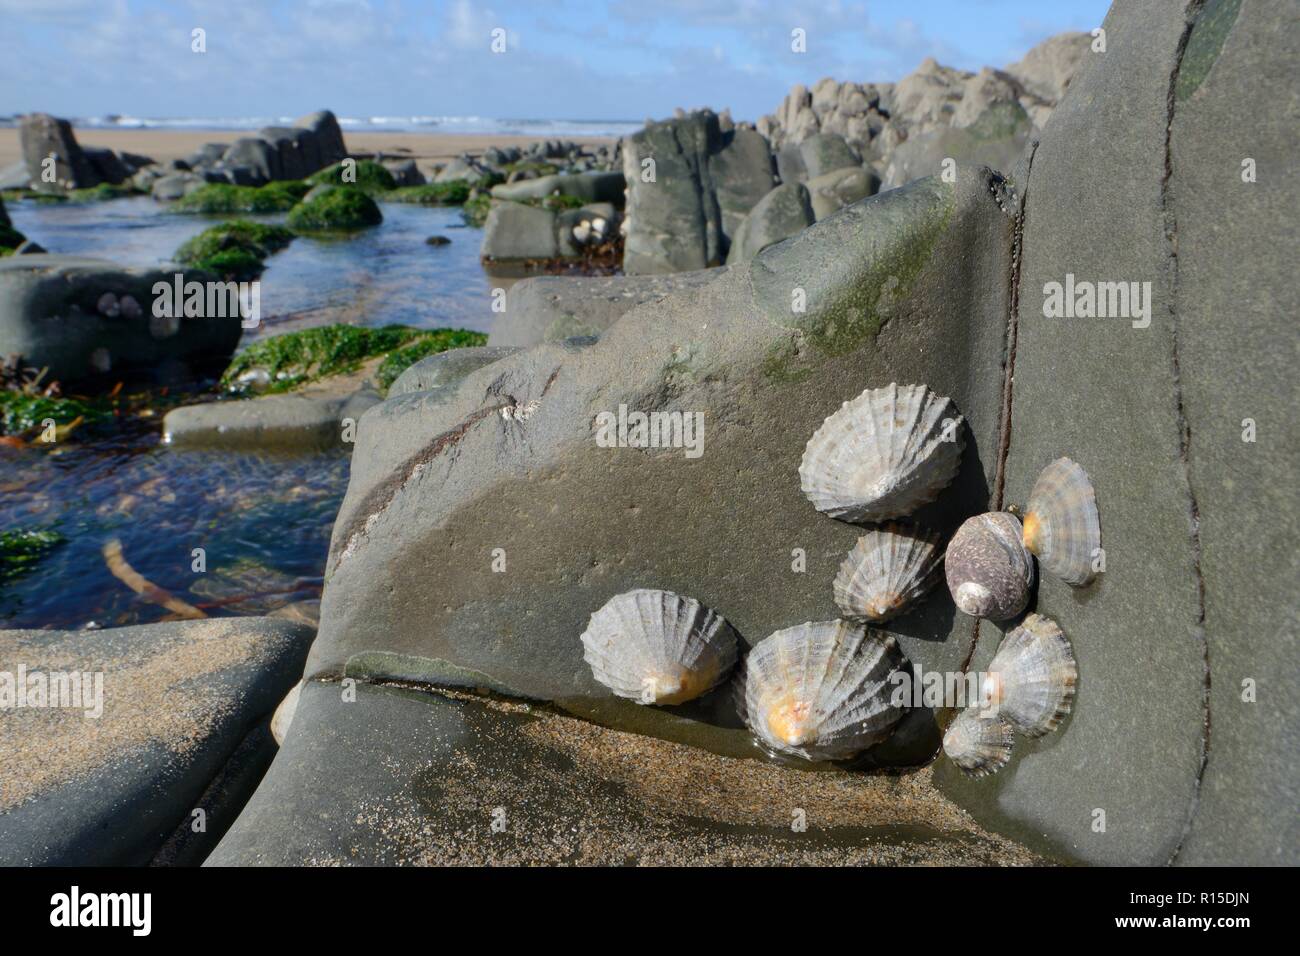 Common limpets (Patella vulgata) and a Thick or Toothed top shell (Osilinus lineatus = Phorcus lineatus) attached to intertidal rocks, Cornwall, UK. Stock Photo